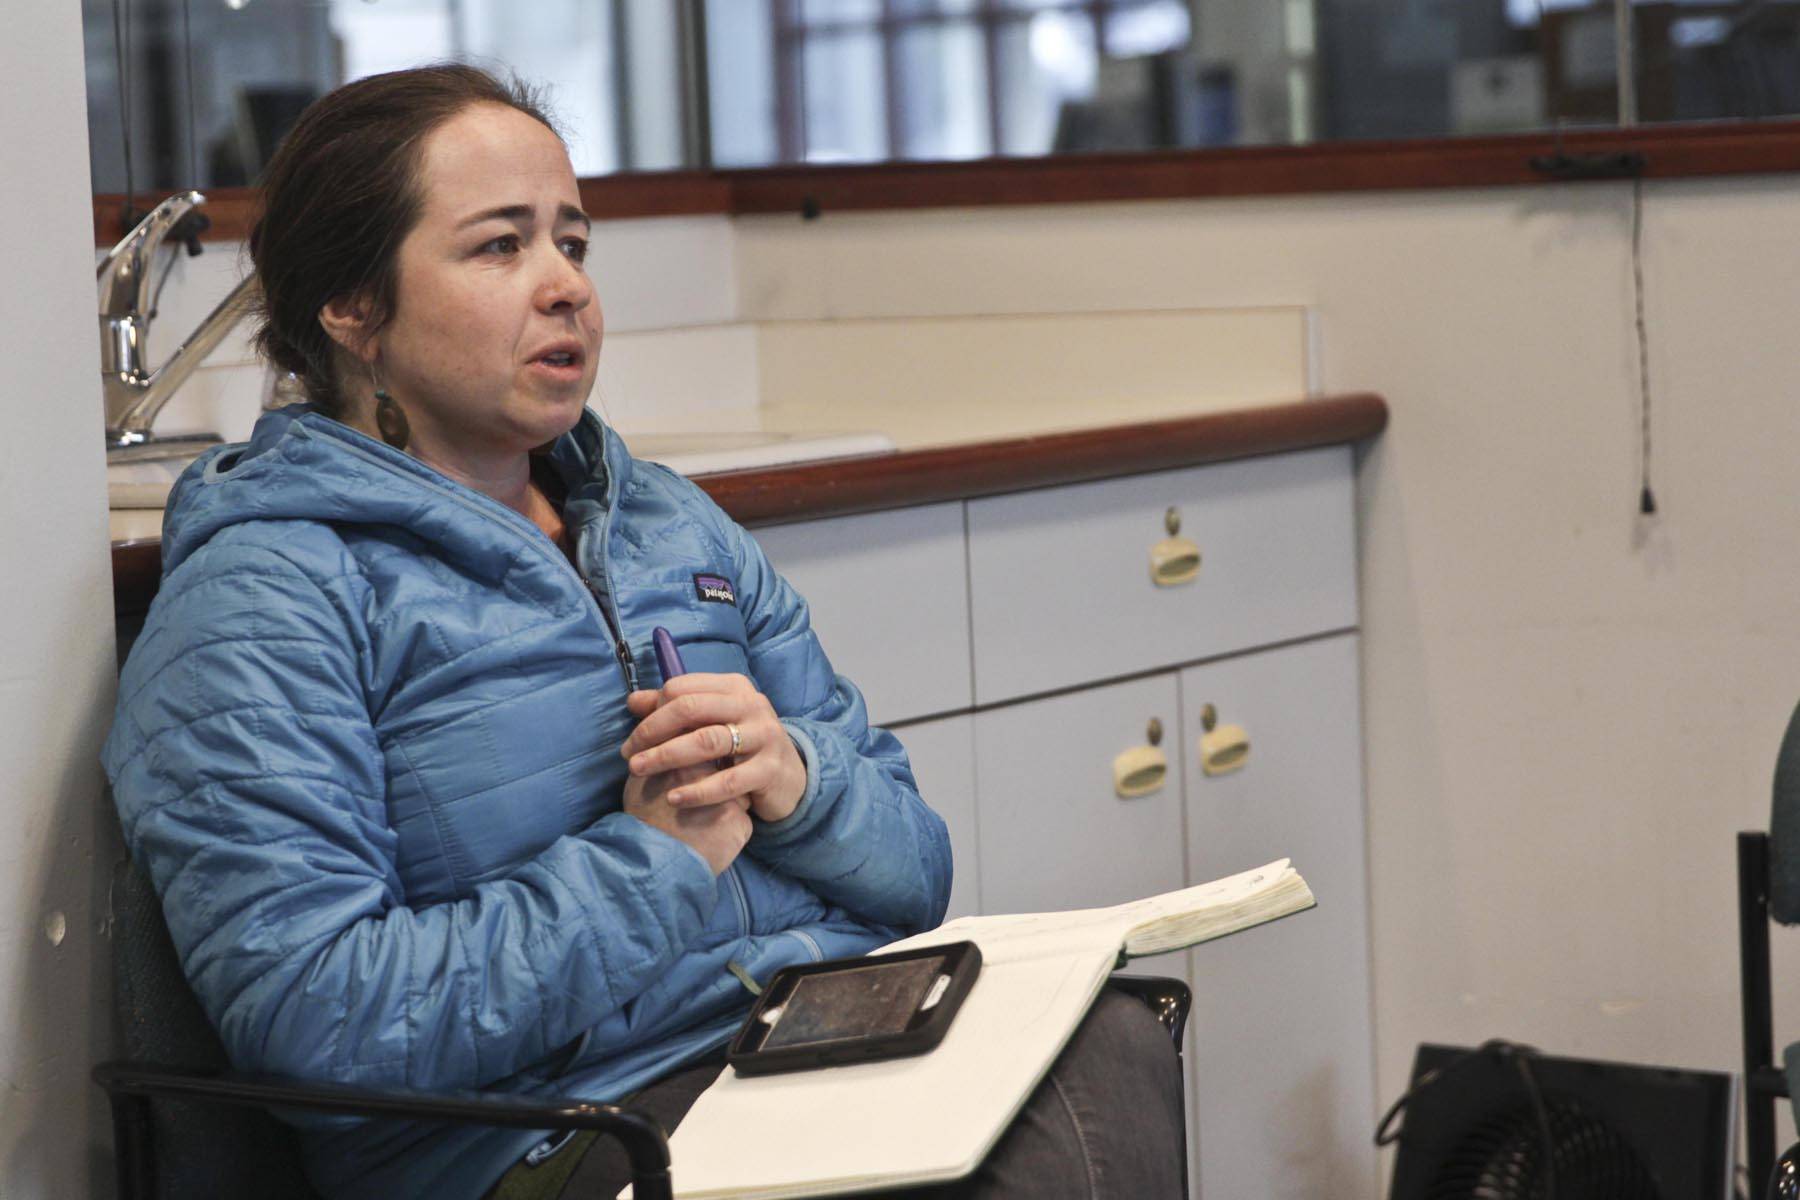 Mariya Lovishchuk, executive director of the Glory Hall, asks a question during a meeting to discuss Juneau’s plan for preventing the spread of the coronavirus among Juneau citizens experiencing homelessness on March 18, 2020. (Michael S. Lockett | Juneau Empire)